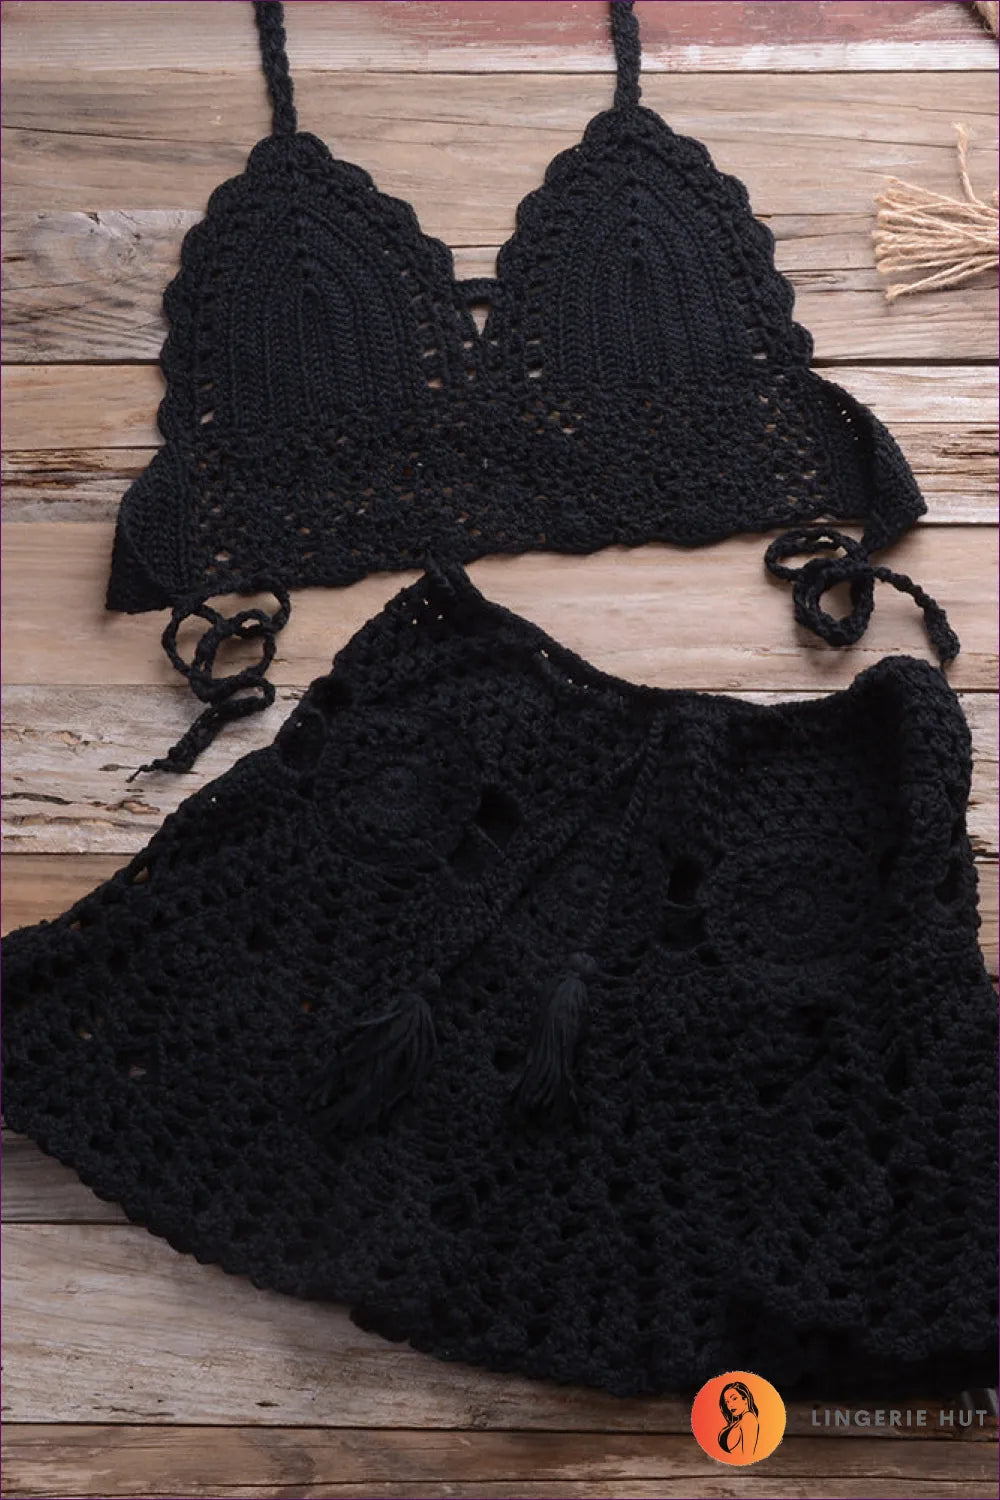 Elevate Your Summer Style With Our Boho Crocheted Bikini Top And Pleated Skirt Set - Perfect For Casual